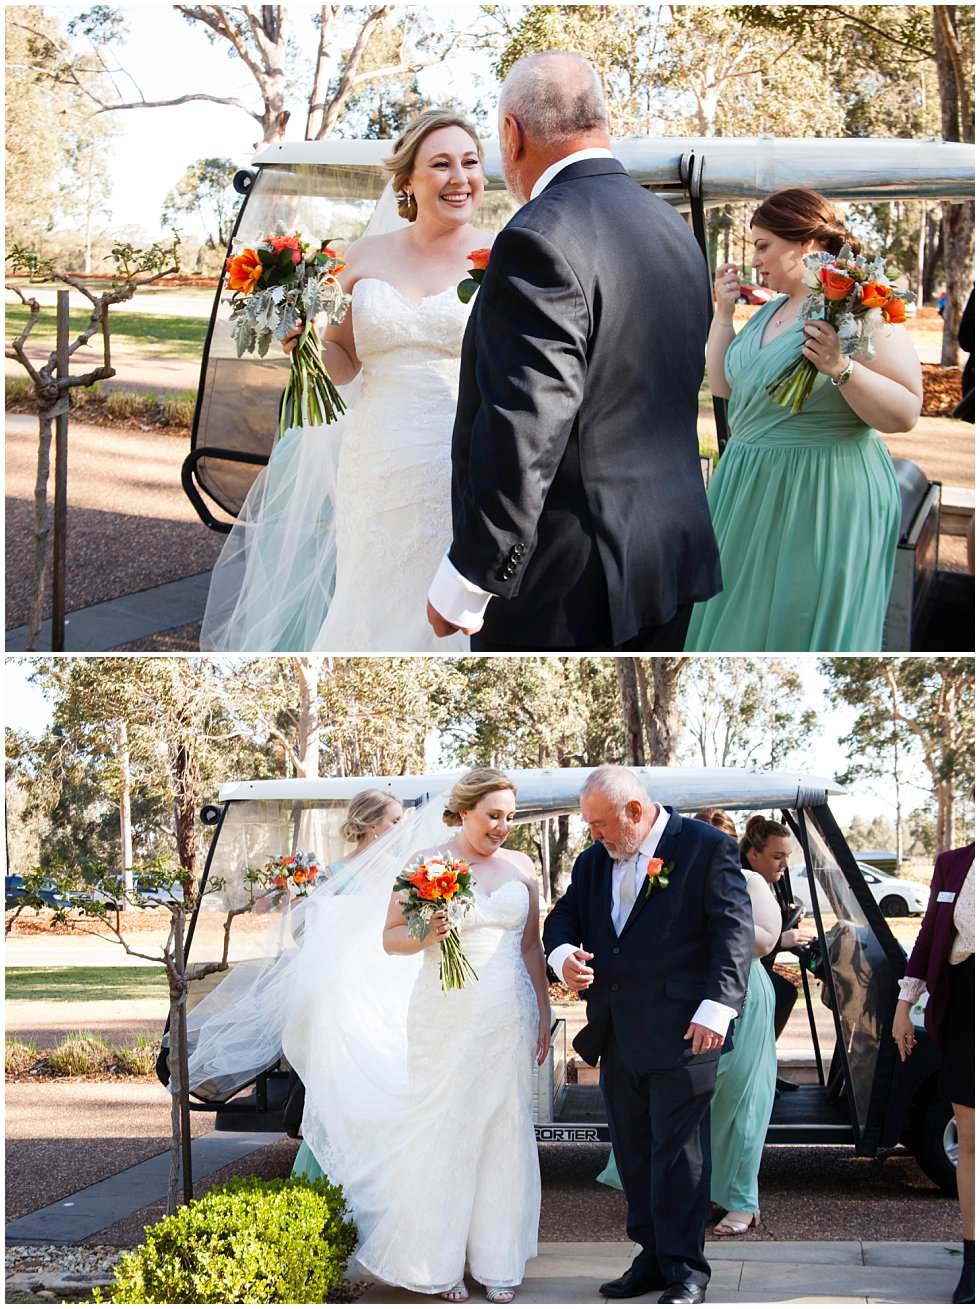 ArtyJ Photography | Photography, Hunter Valley Wedding Photographer, Affections Wedding &amp; Event Hire, Jules Amidy, Chateau Elan, The Vintage, The Carriage House, Spring Wedding, Wedding, Pokolbin, Sincopa Trio, NSW, Chic Artistry | Ursula & Jono | Wedding